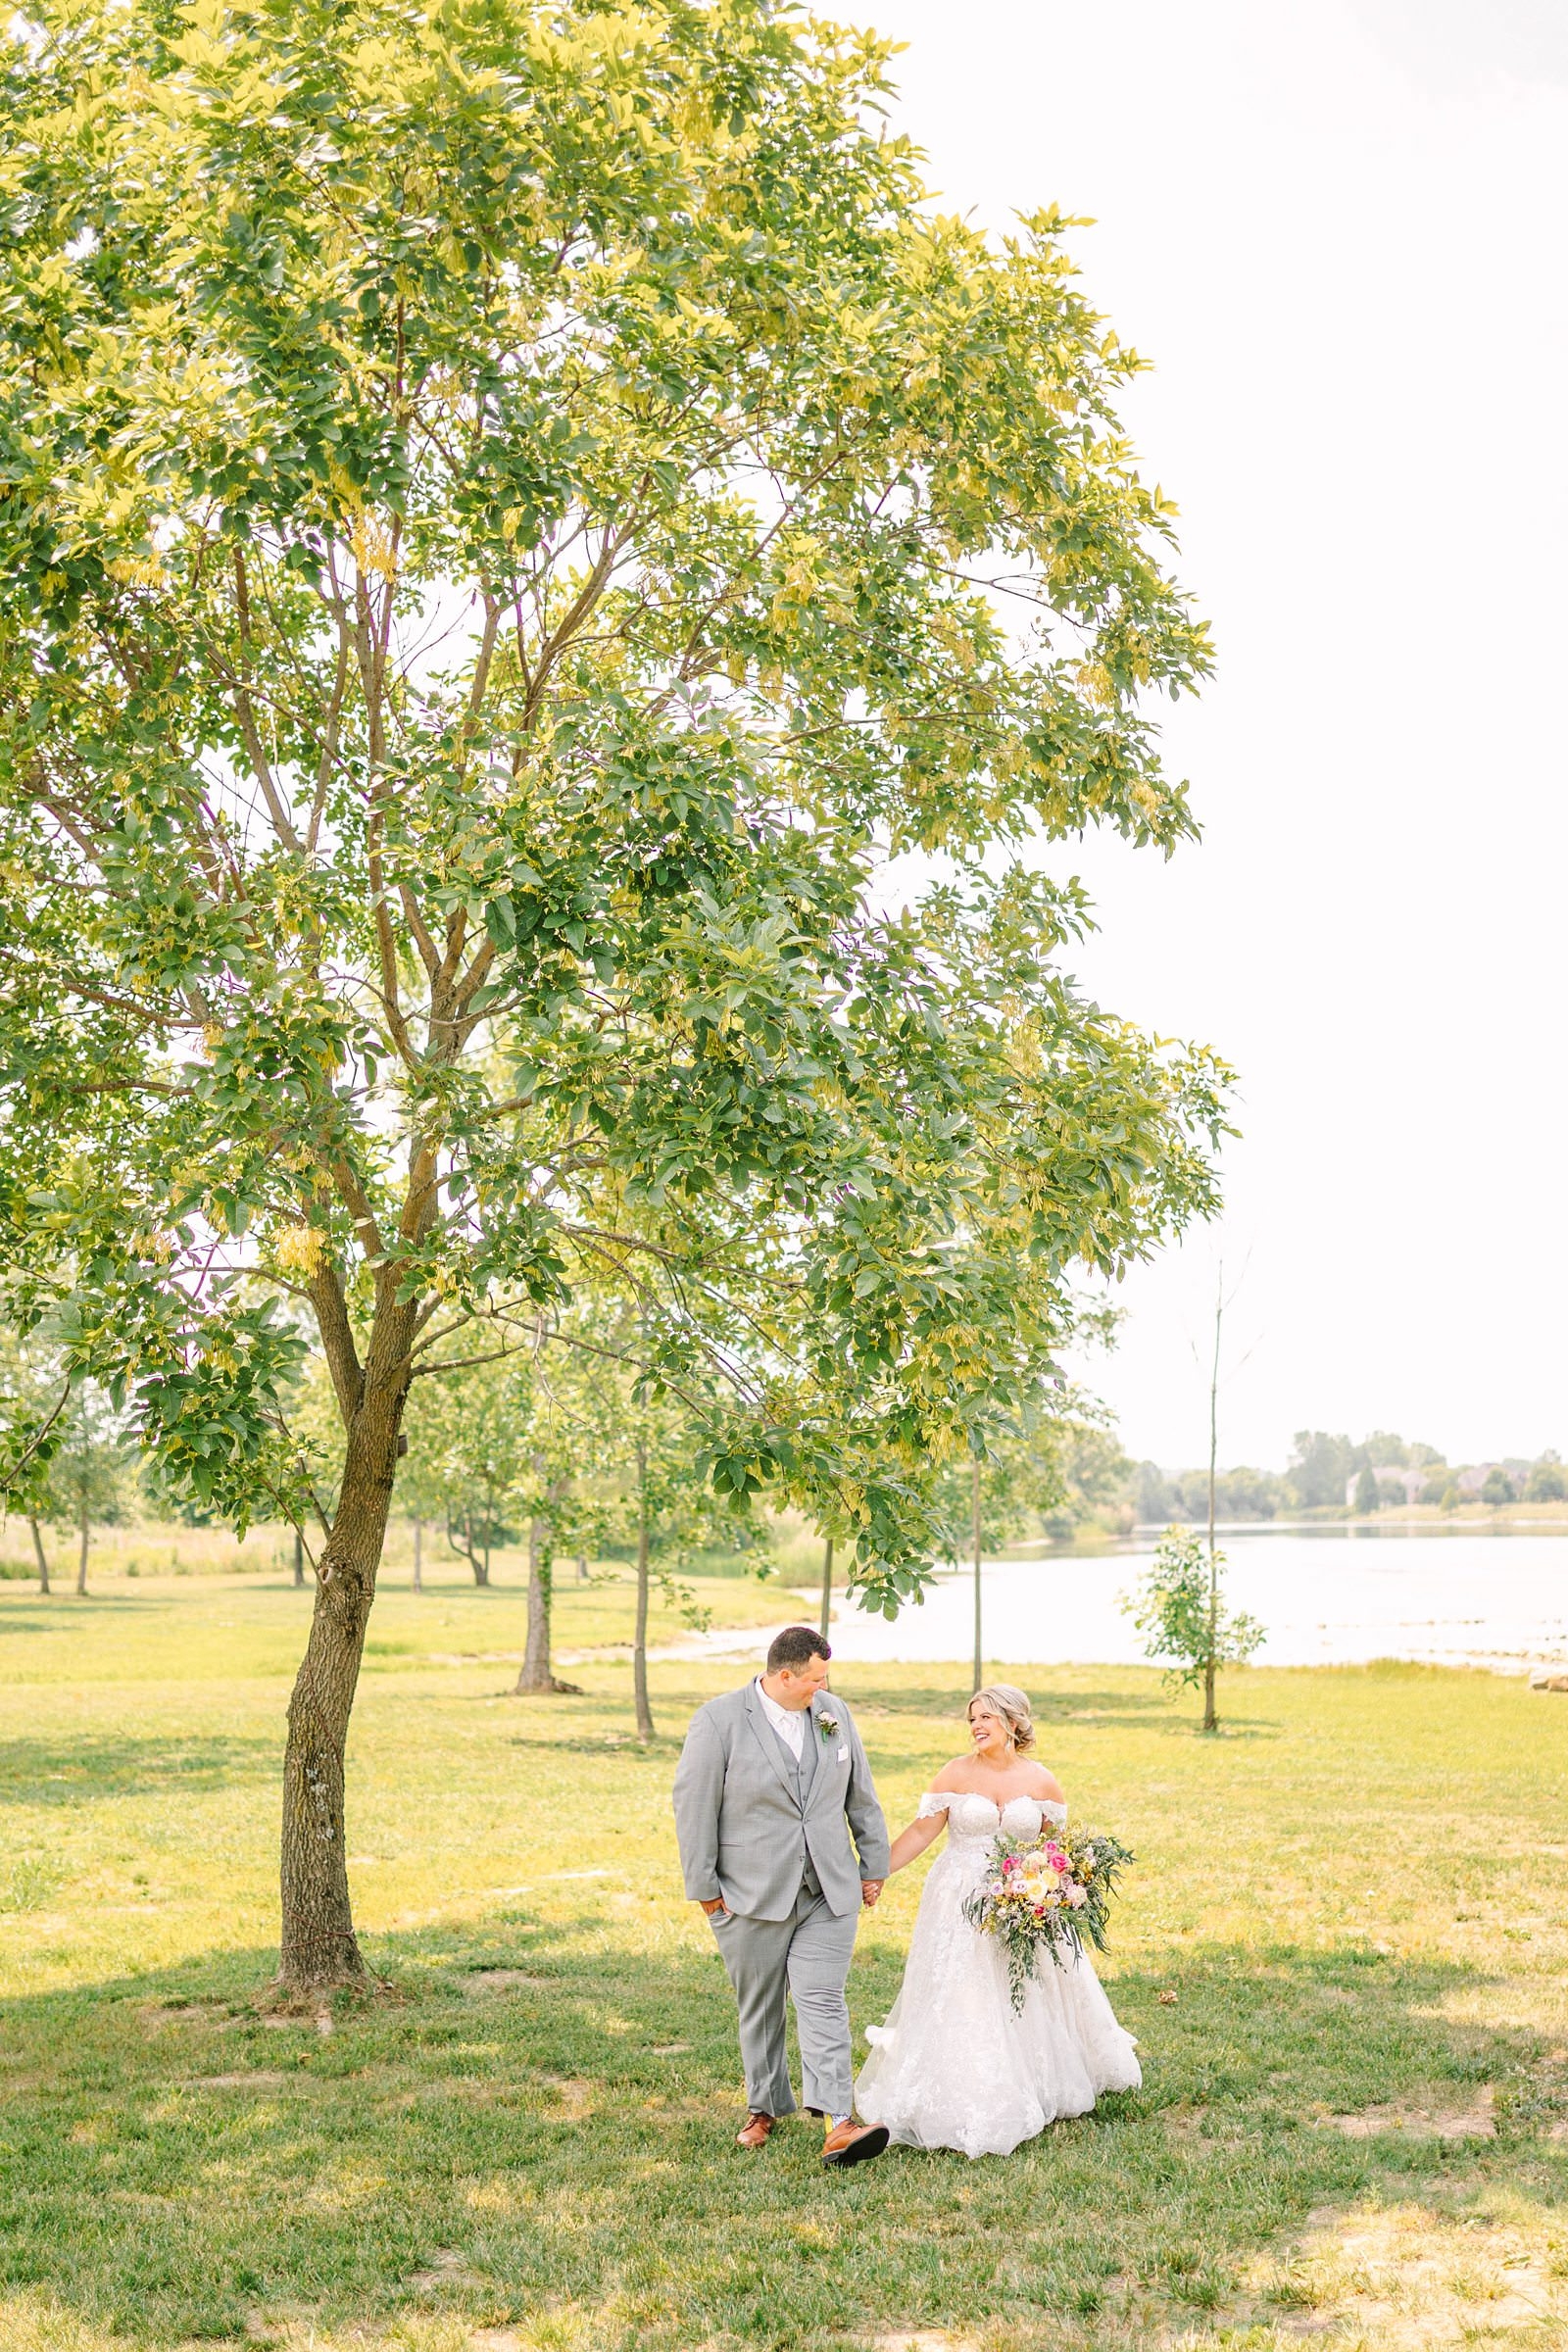 A Sunny Summer Wedding at Friedman Park in Newburgh Indiana | Paige and Dylan | Bret and Brandie Photography082.jpg